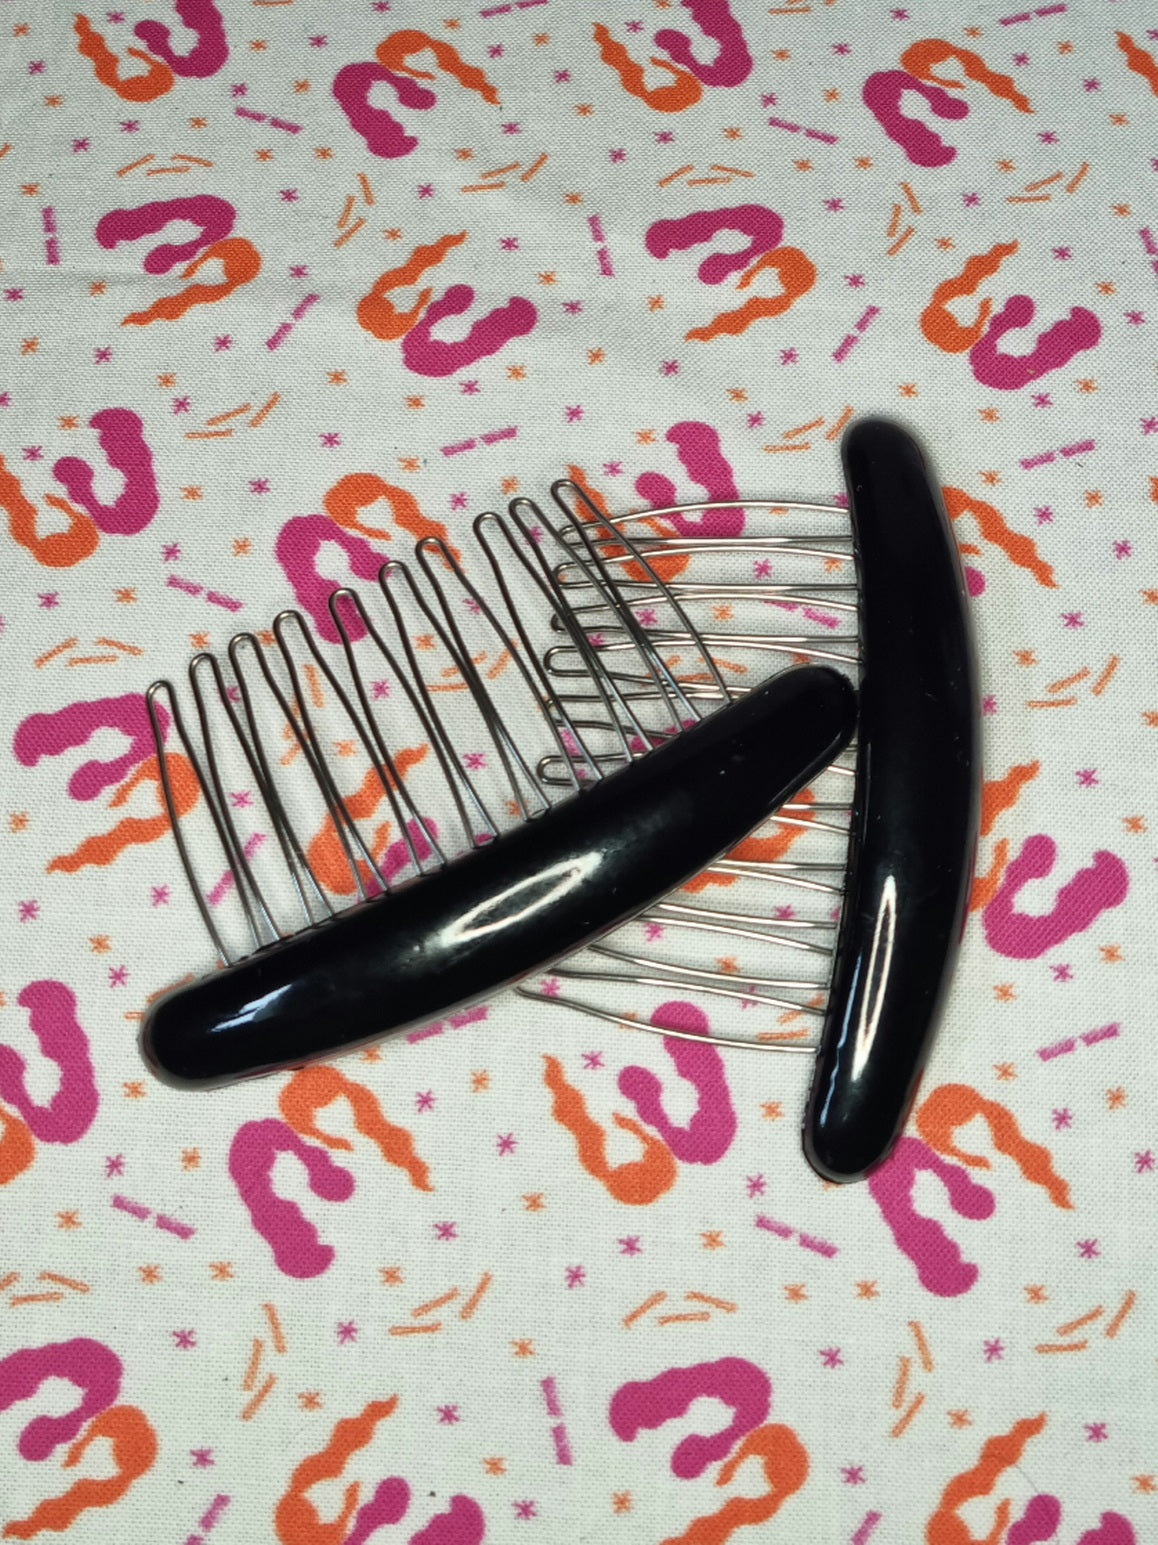 1940s Style Side Combs